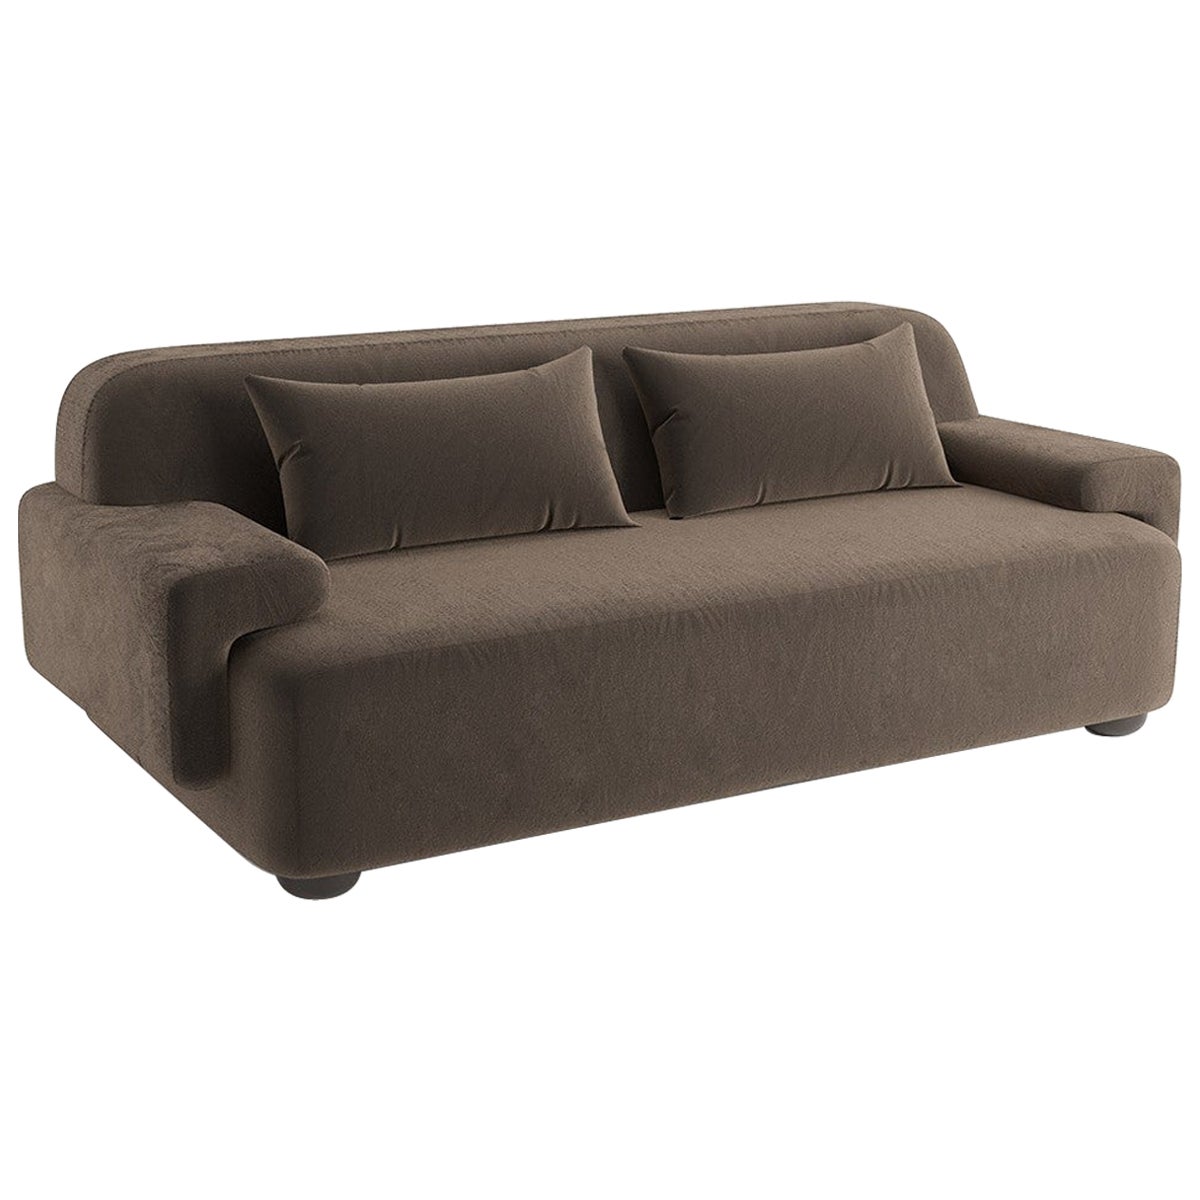 Popus Editions Lena 4 Seater Sofa in Brown Verone Velvet Upholstery For Sale